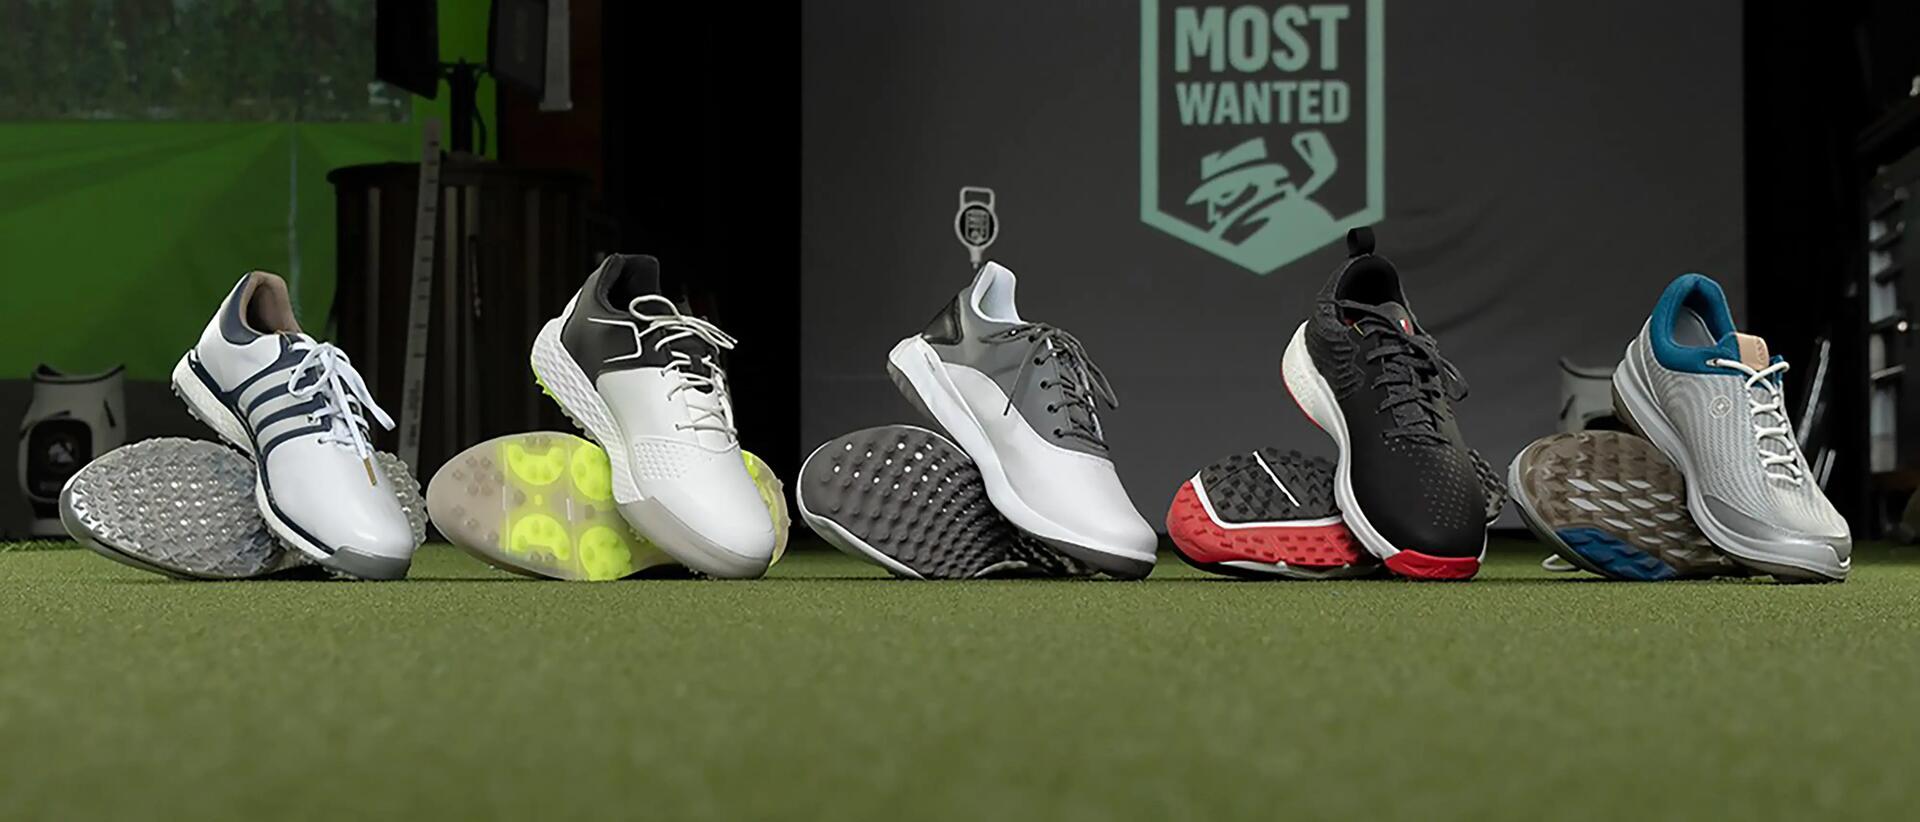 Line of golf shoes